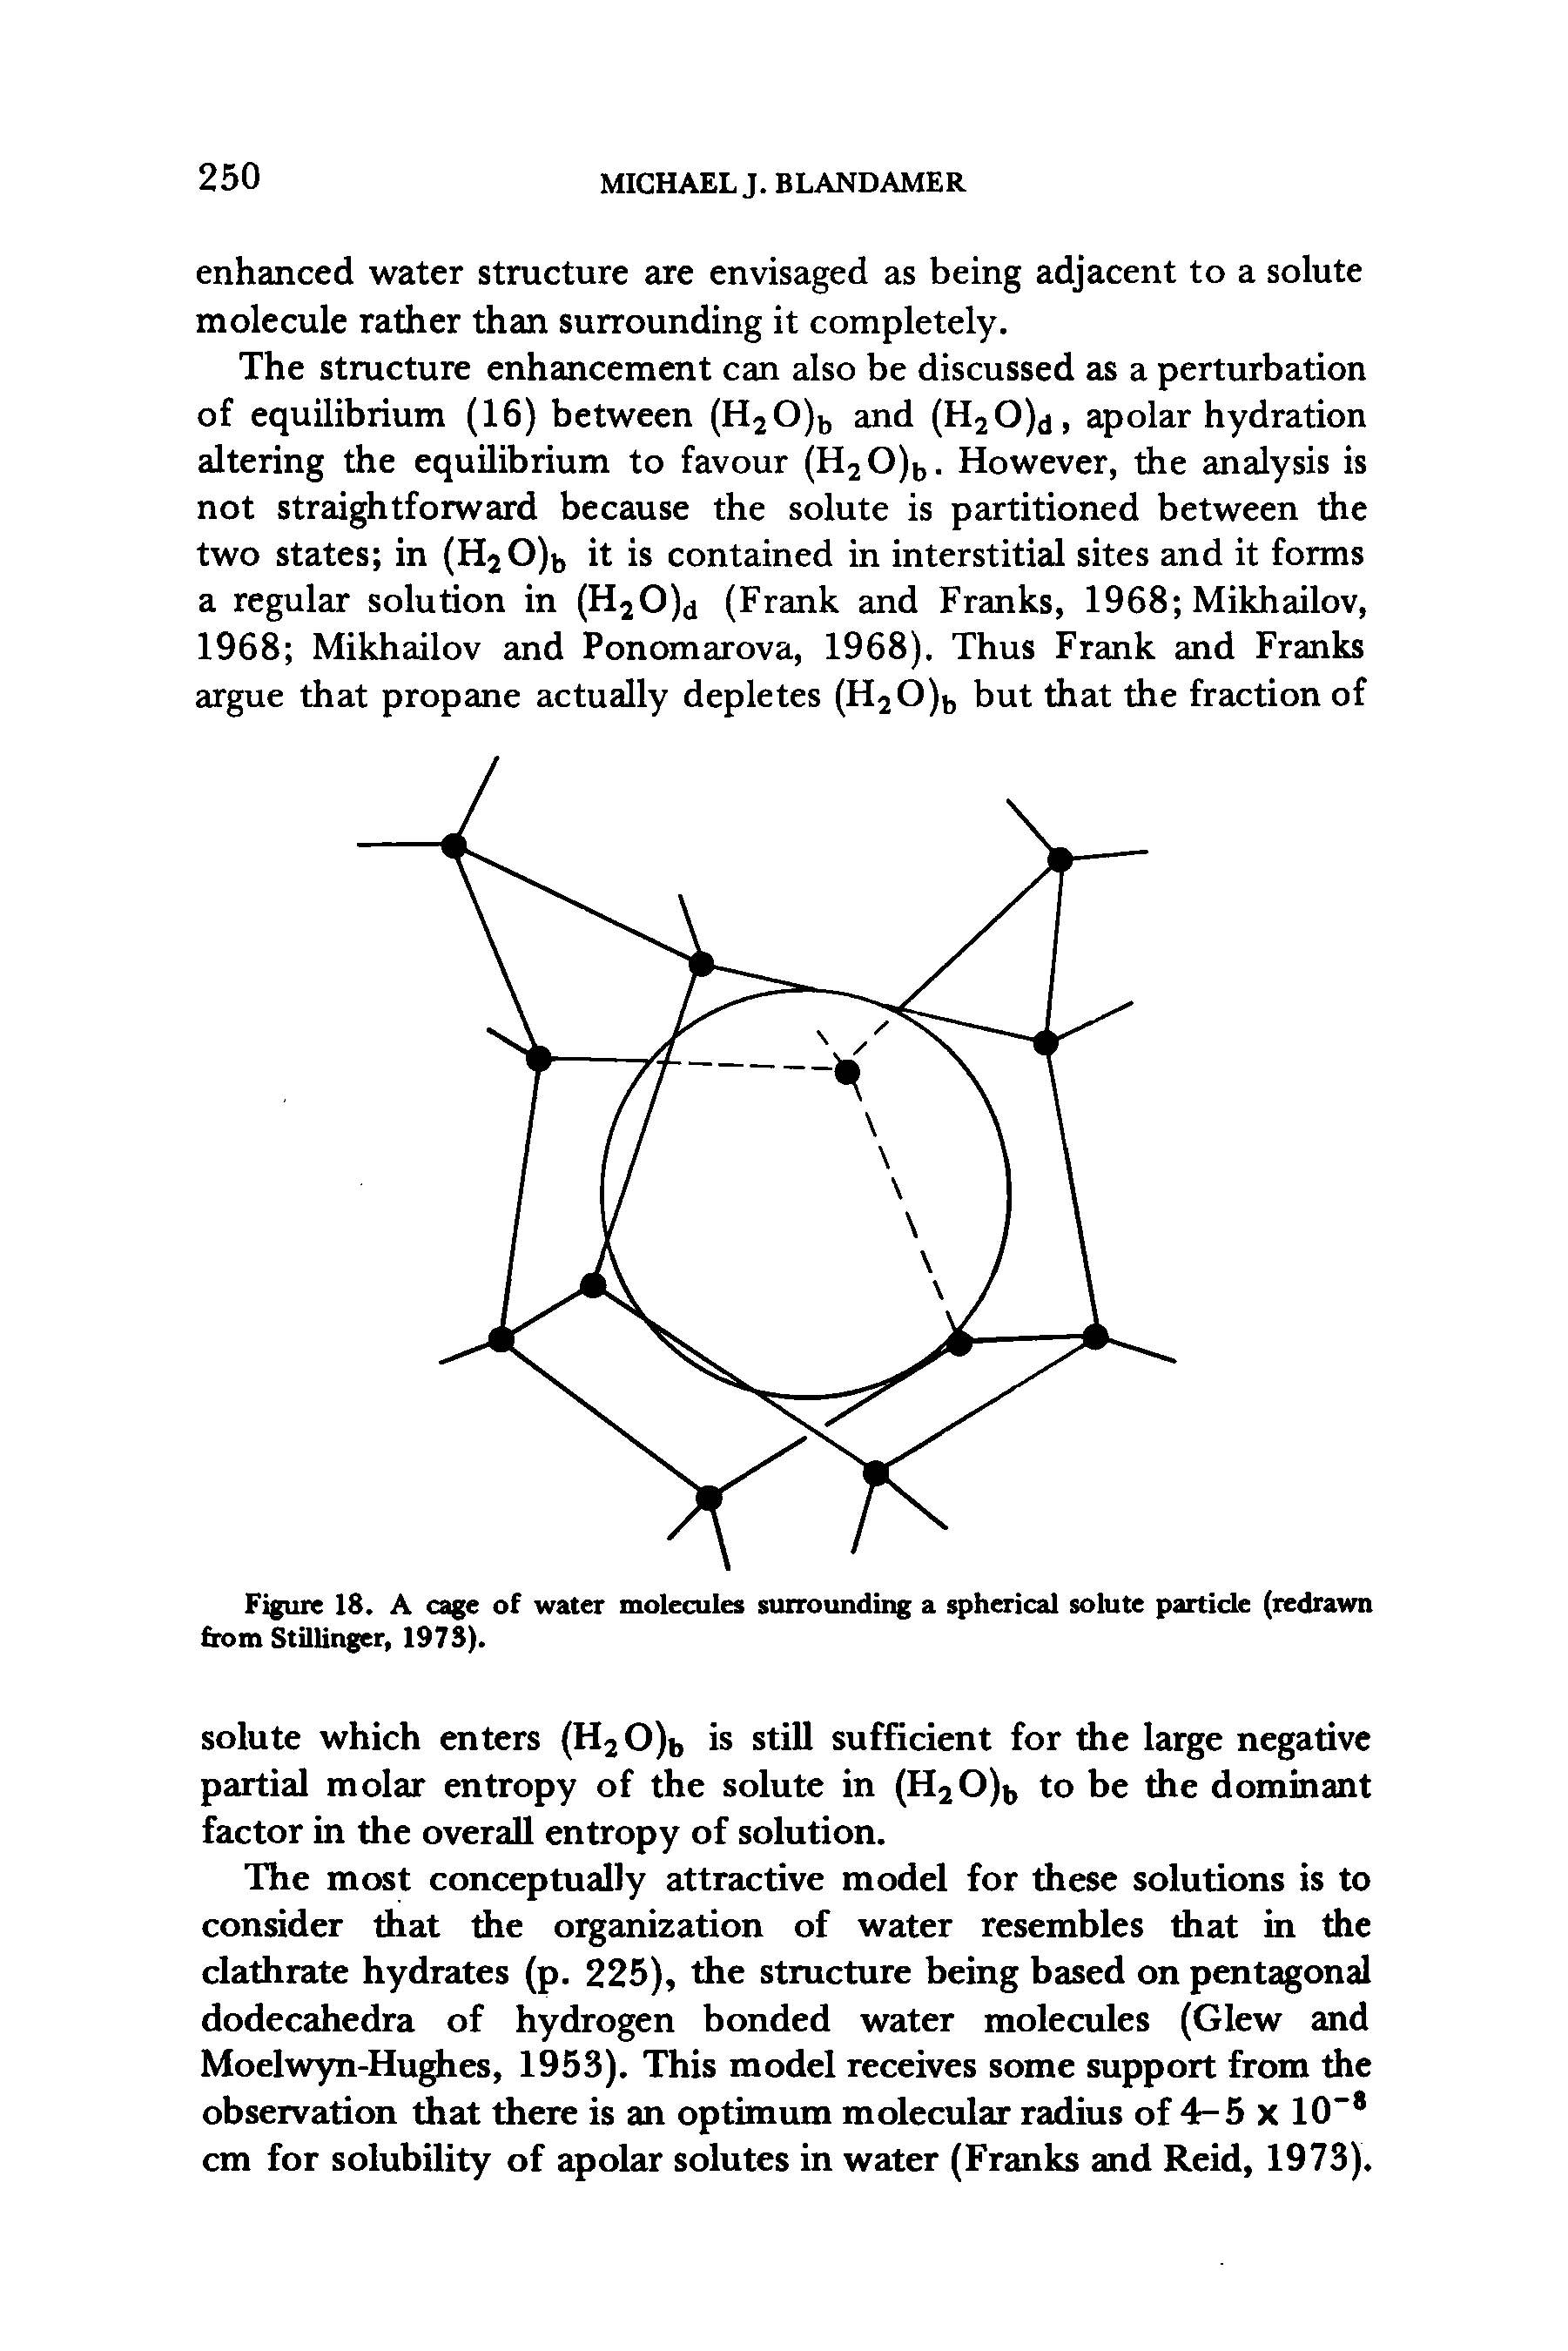 Figure 18. A cage of water molecules surrounding a spherical solute particle (redrawn from Stillinger, 1973).